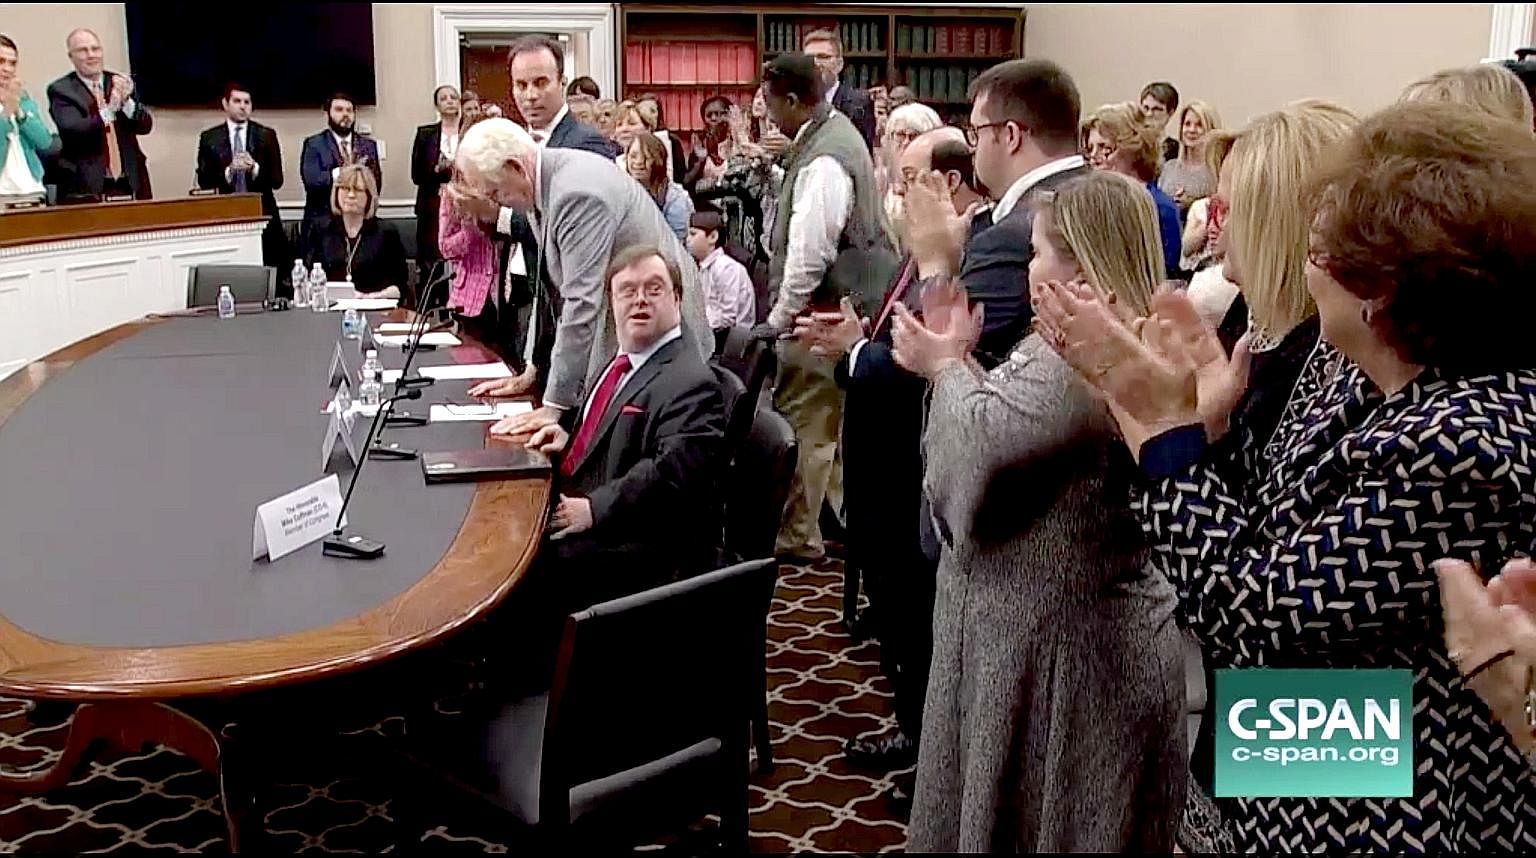 A post put up reportedly on behalf of the Russian government to sway the US presidential elections last year. Mr John Franklin Stephens (seated) at a US congressional hearing last week. He was urging the allocation of federal funds to conduct further